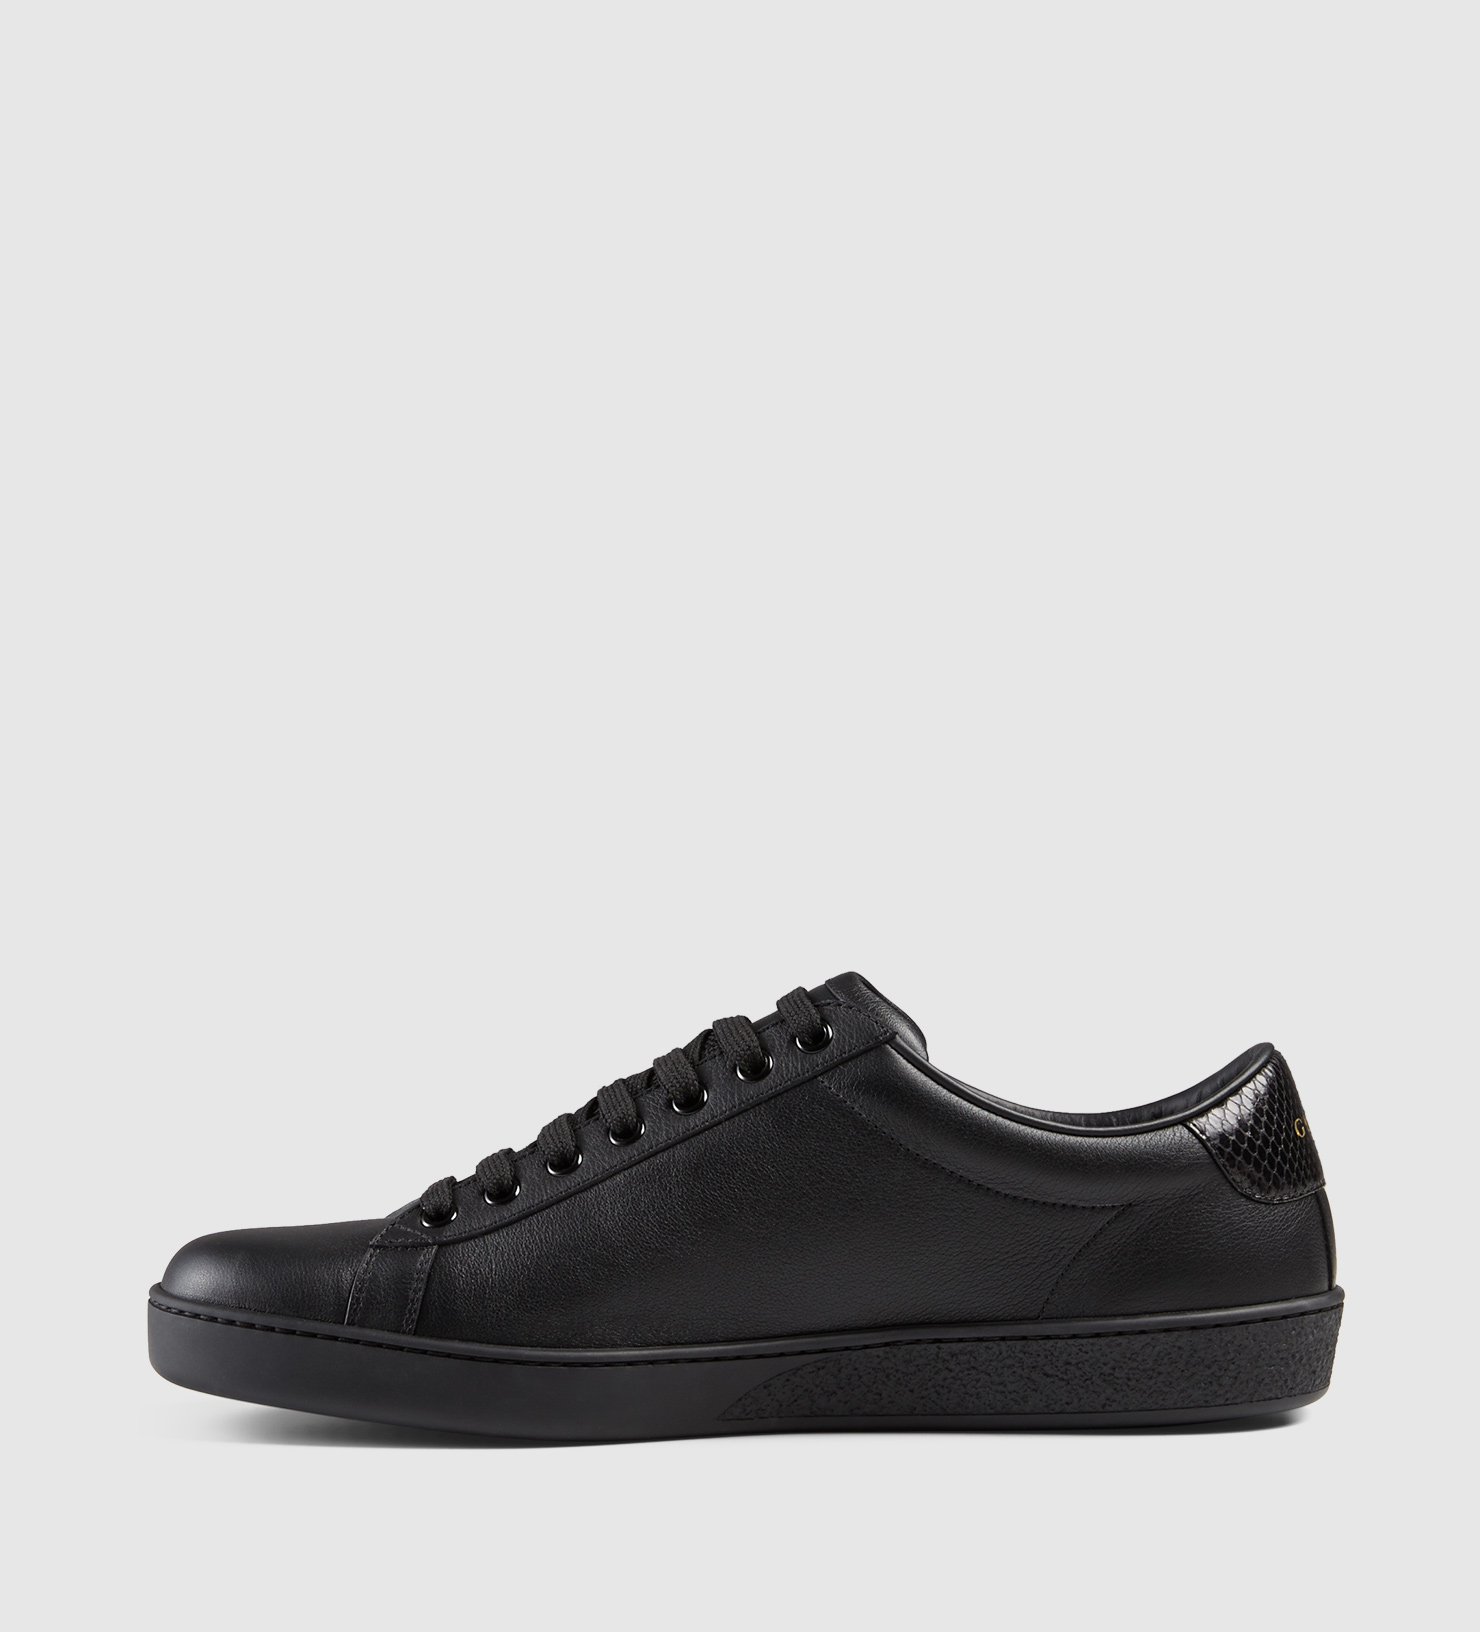 Lyst - Gucci Leather Low-top Sneaker With Ayers Detail in Black for Men